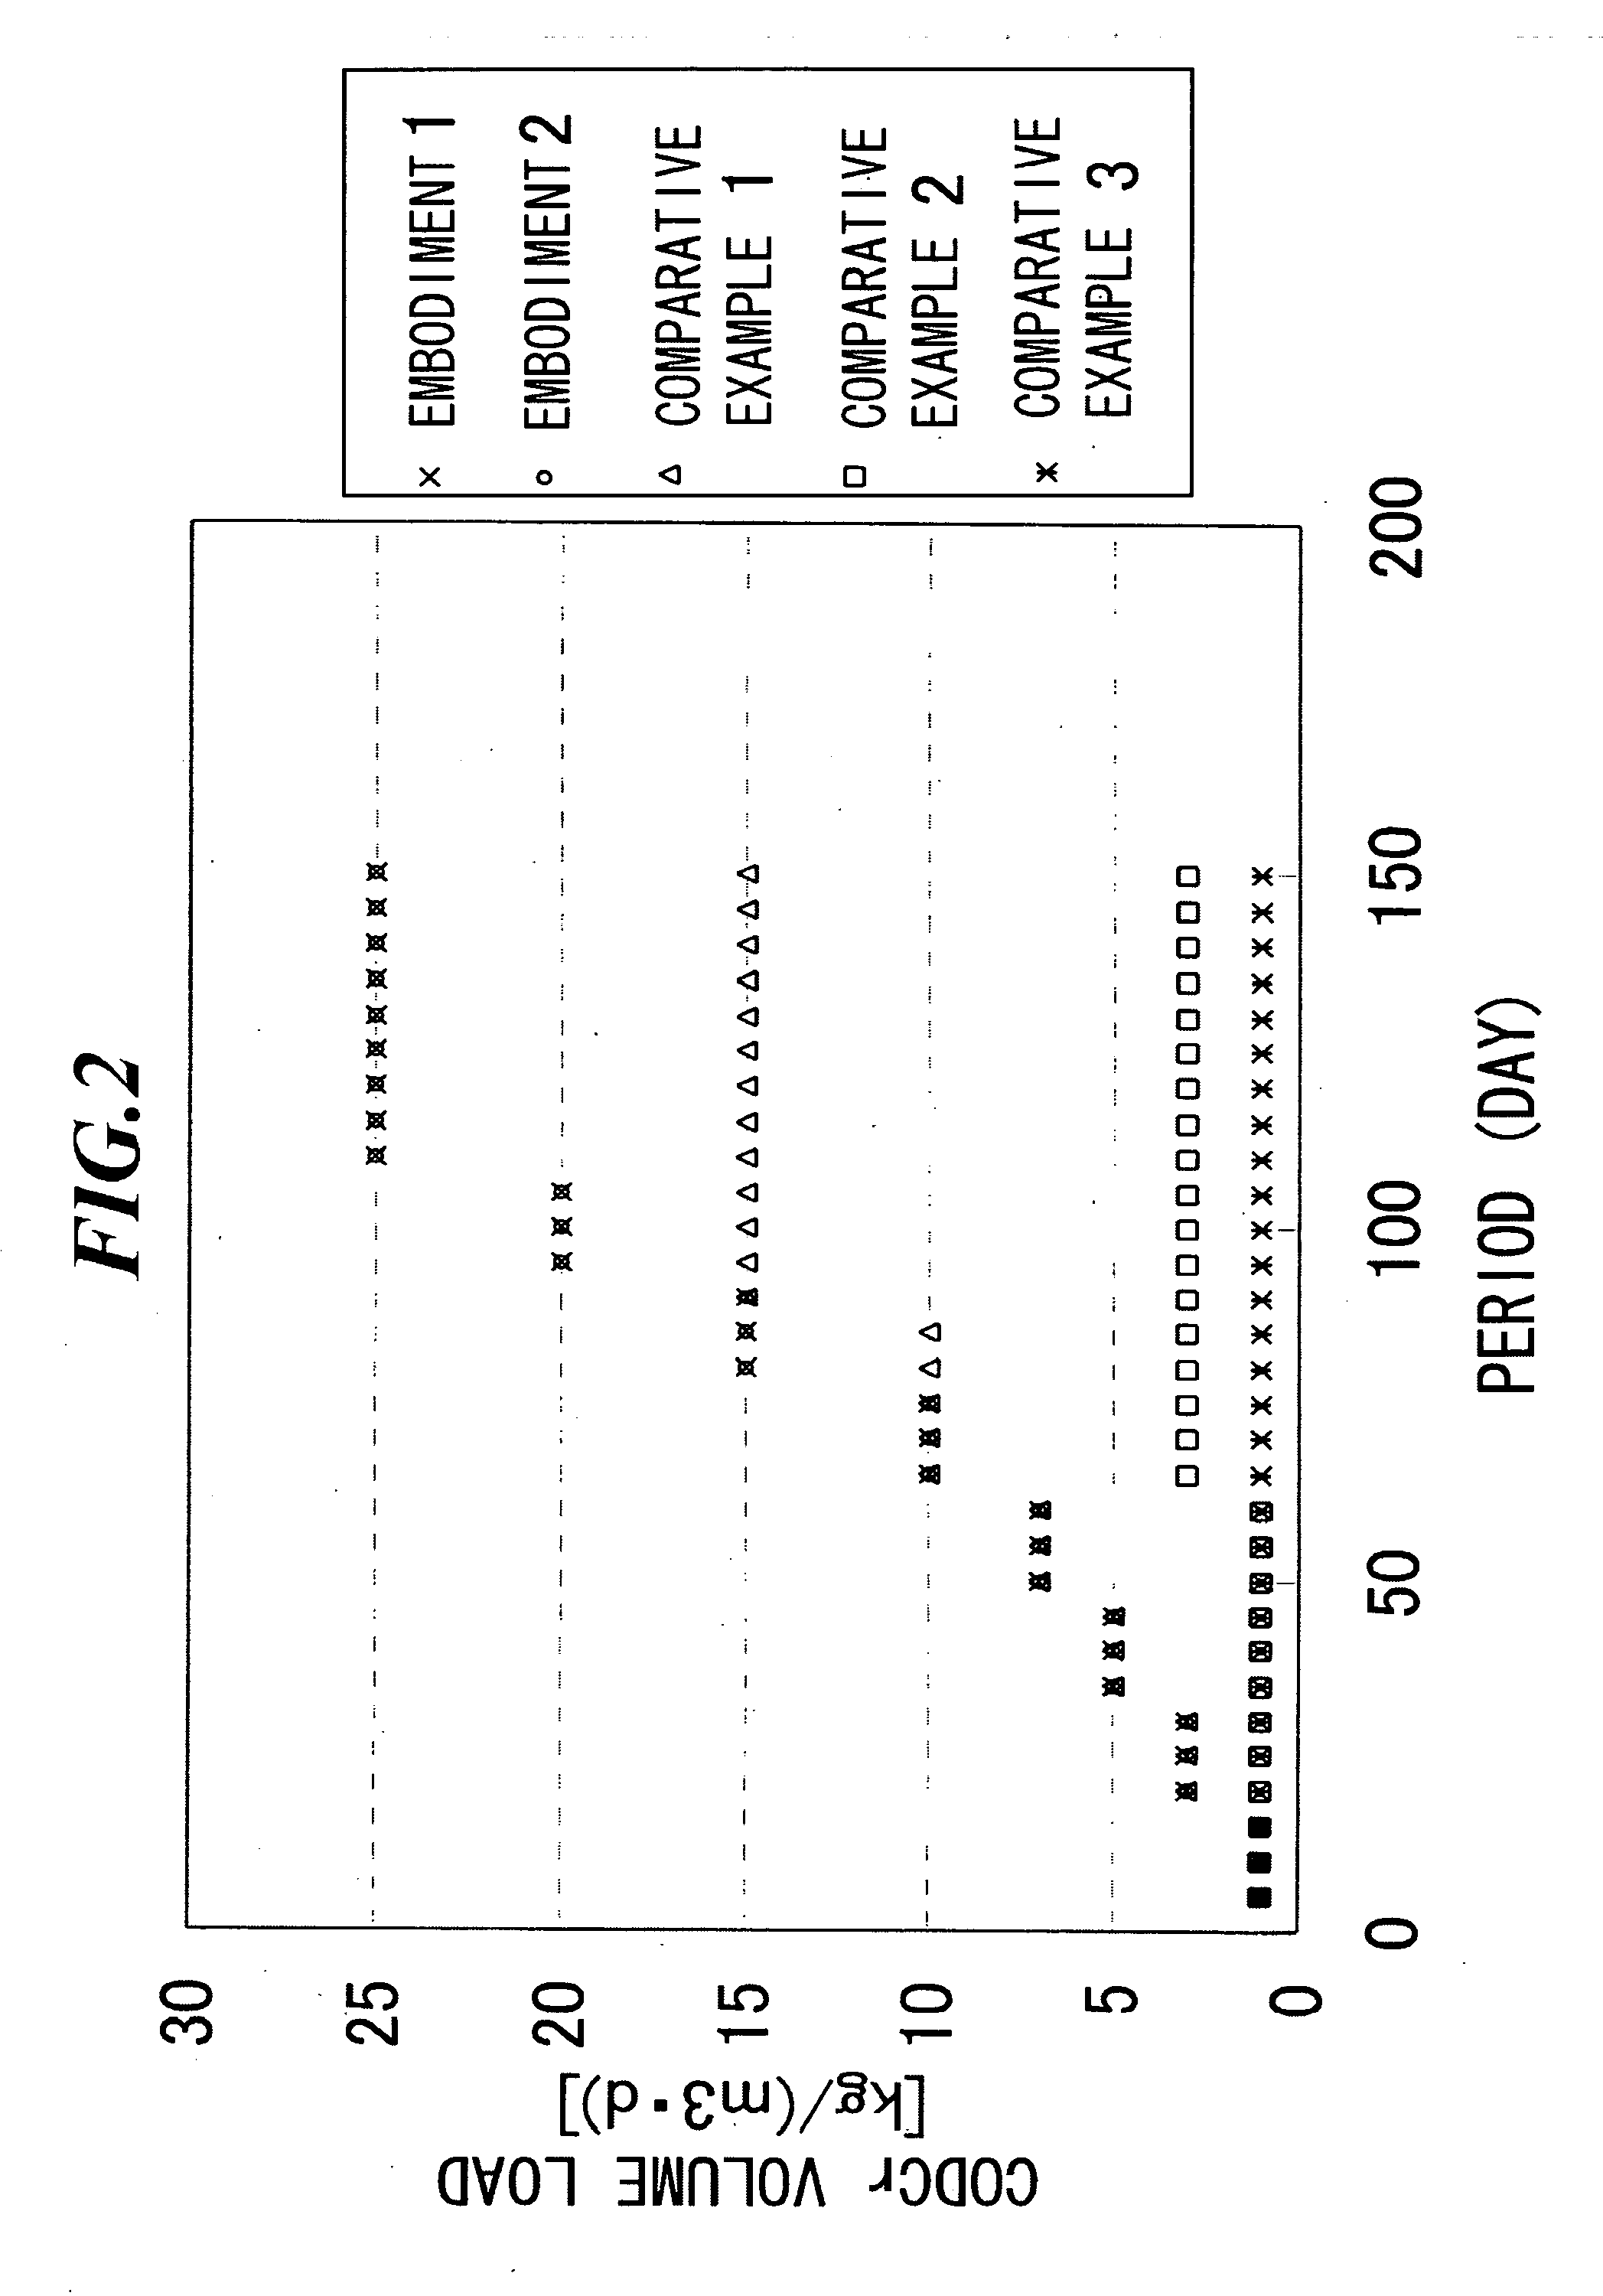 Method and system for the methane fermentation treatment of wastewater containing sulfur compound